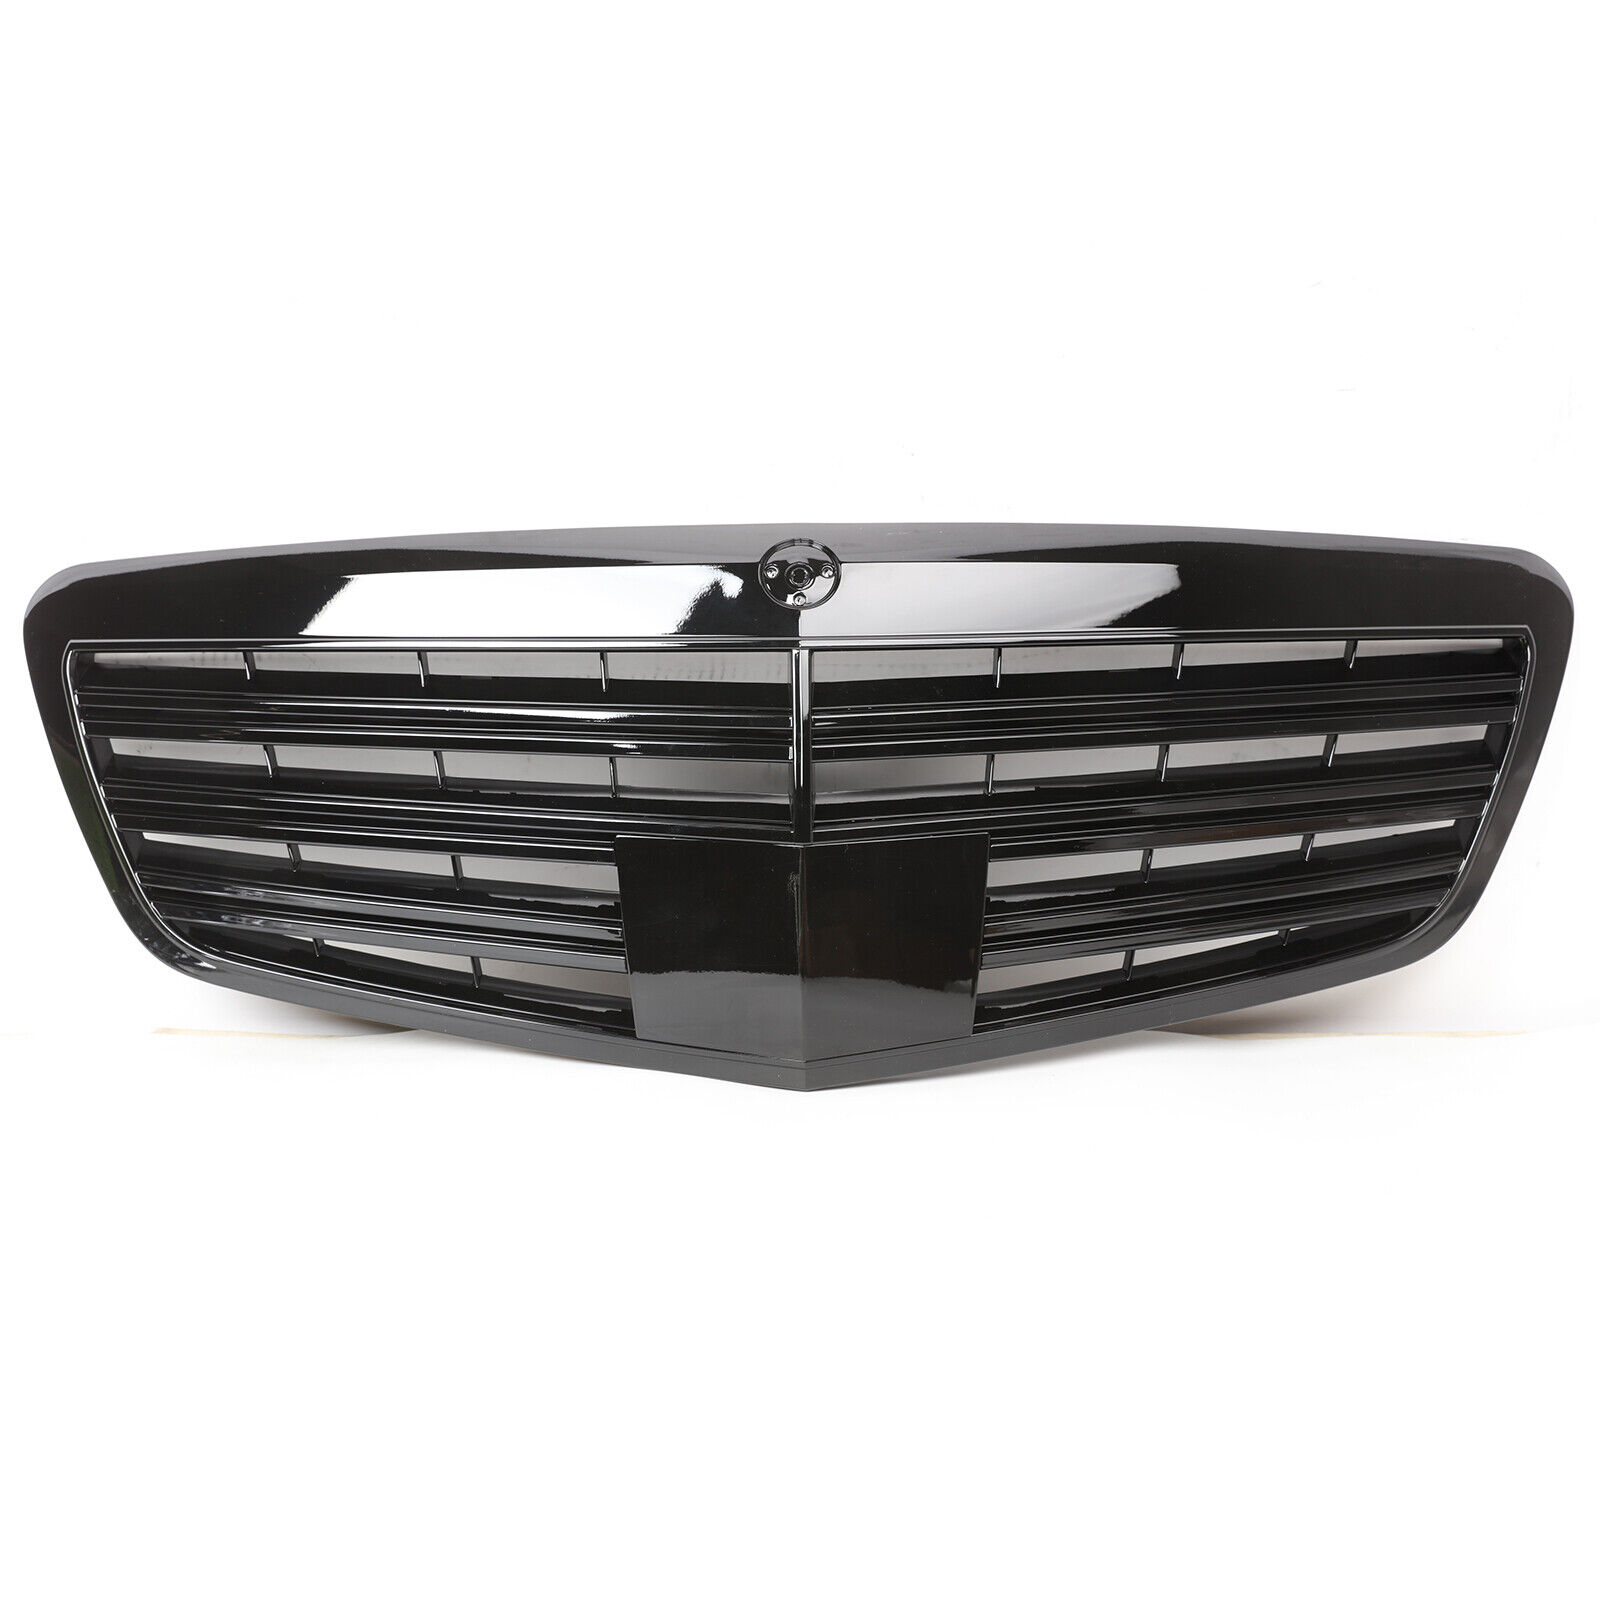 FRONT GRILLE GRILL FOR  Mercedes Benz S-Class W221 S550 S600 GLOSS BLACK 2010-13